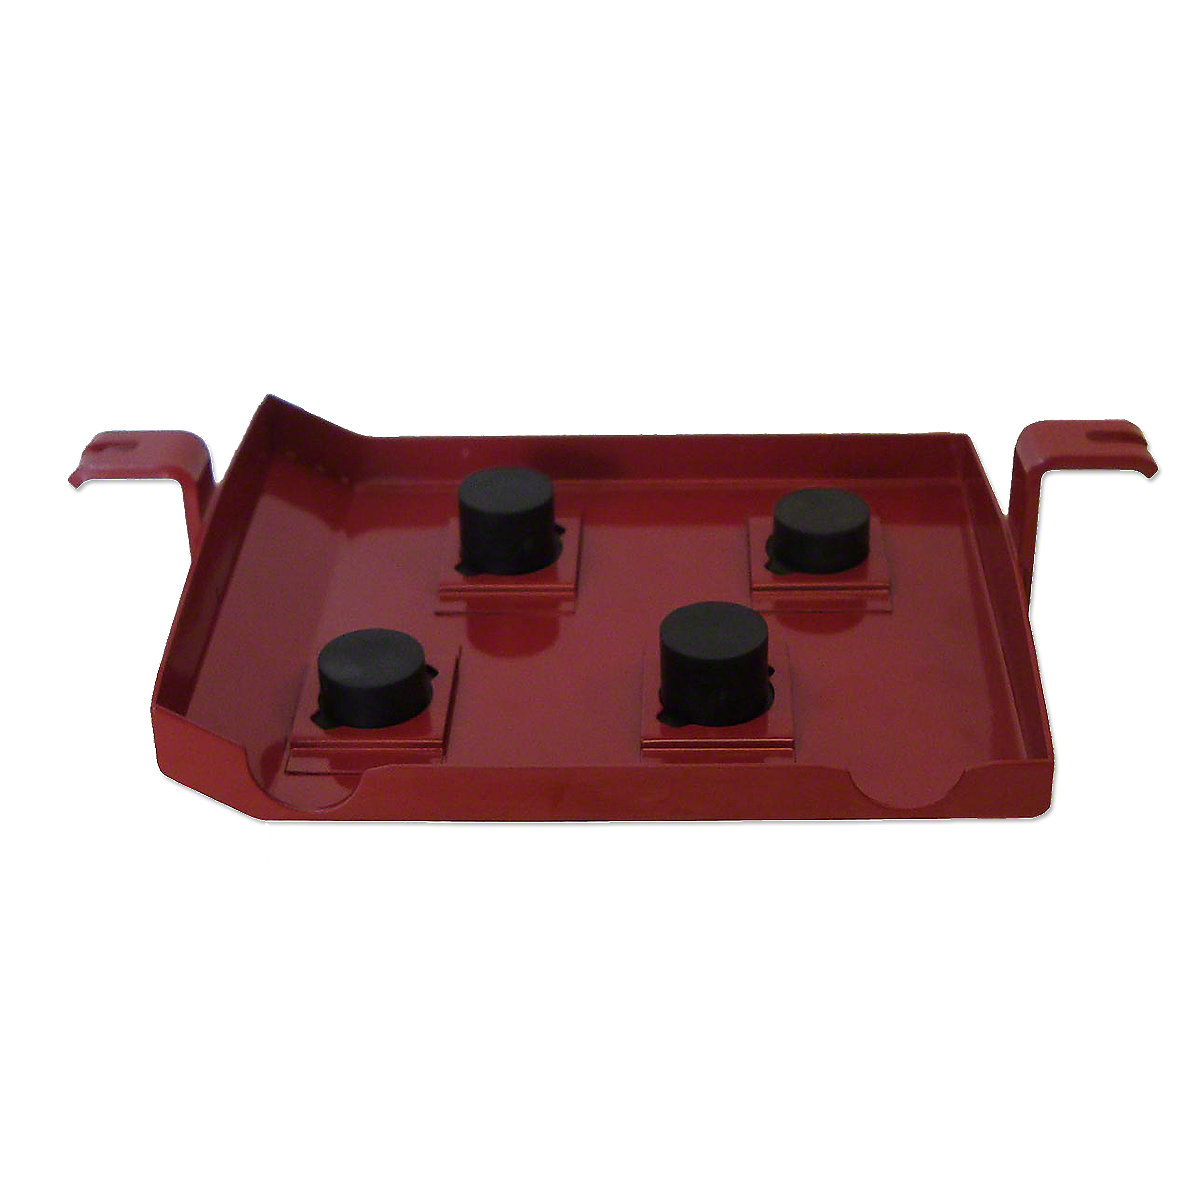 Battery Box  Lid (ONLY THE LID)for H, HV, Super H, W-6